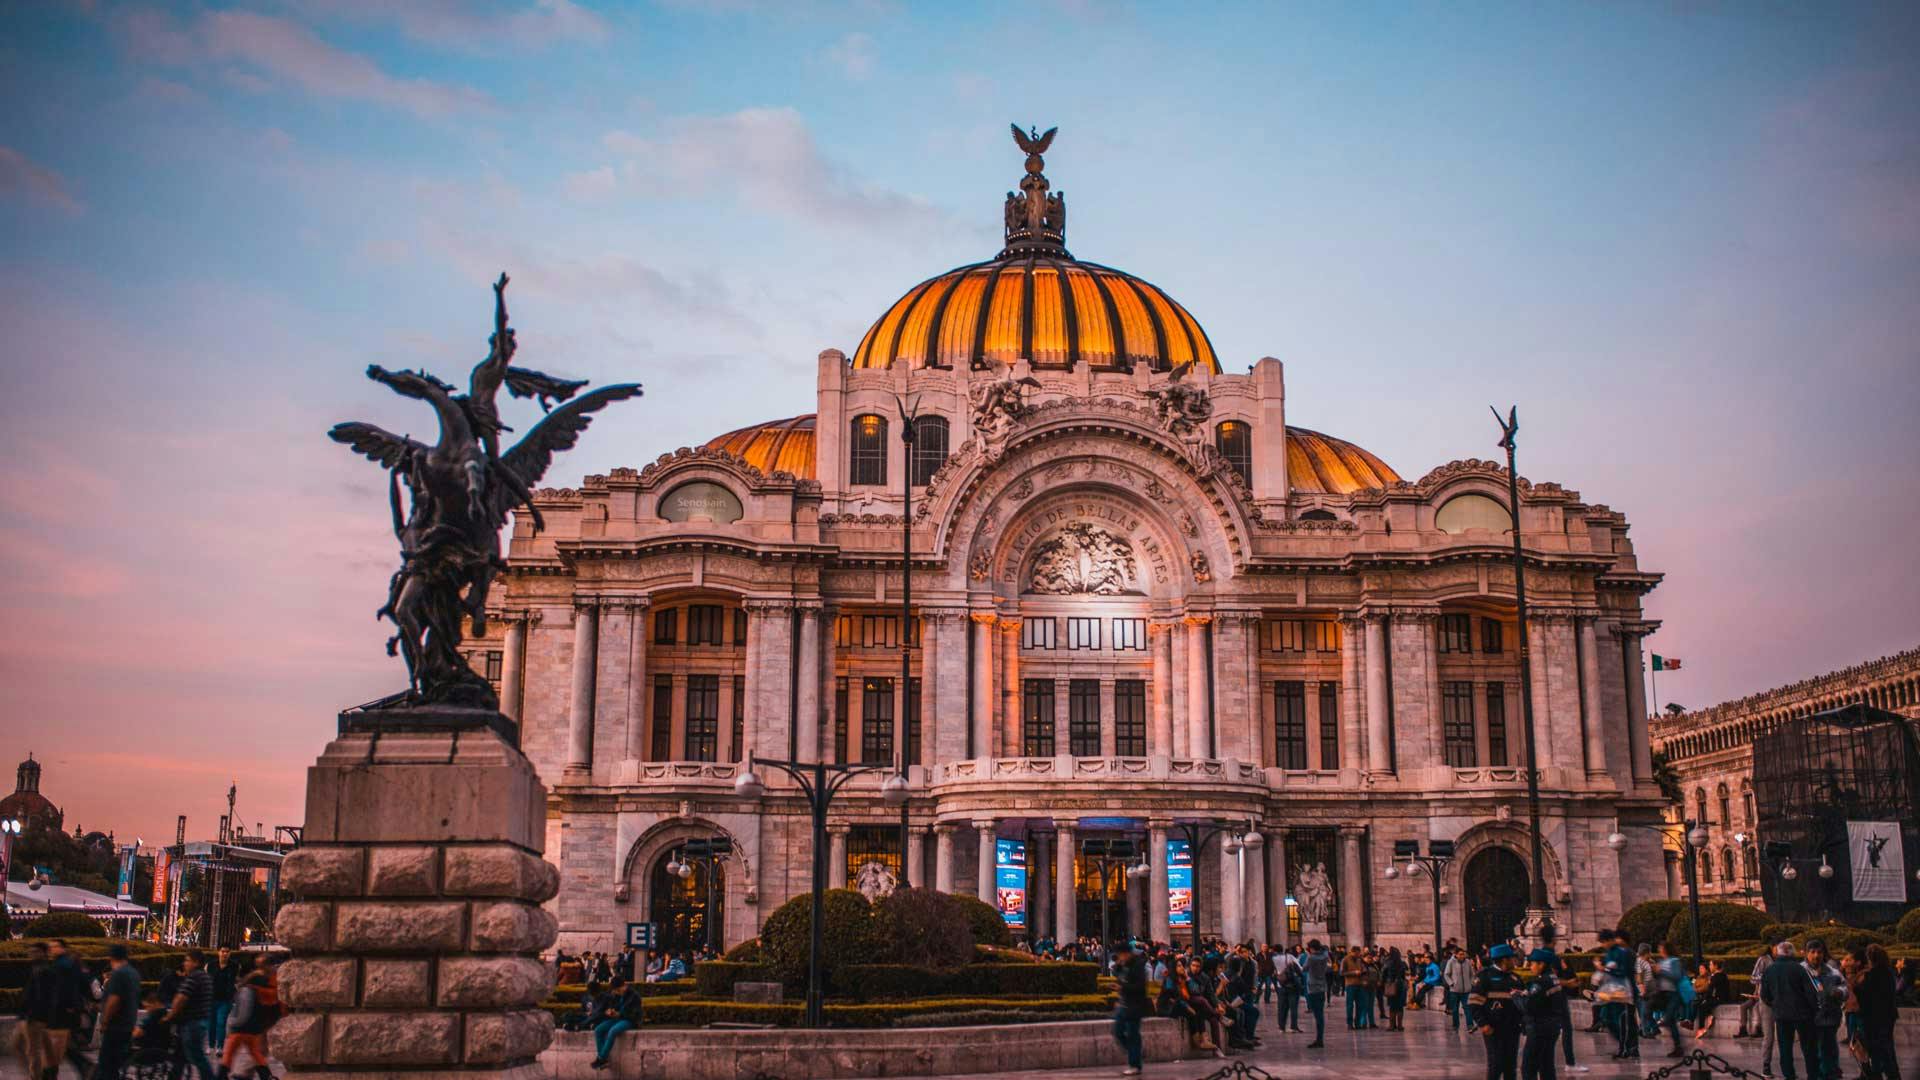 A Roman style looking building framed by columns and a cupola in Mexico City